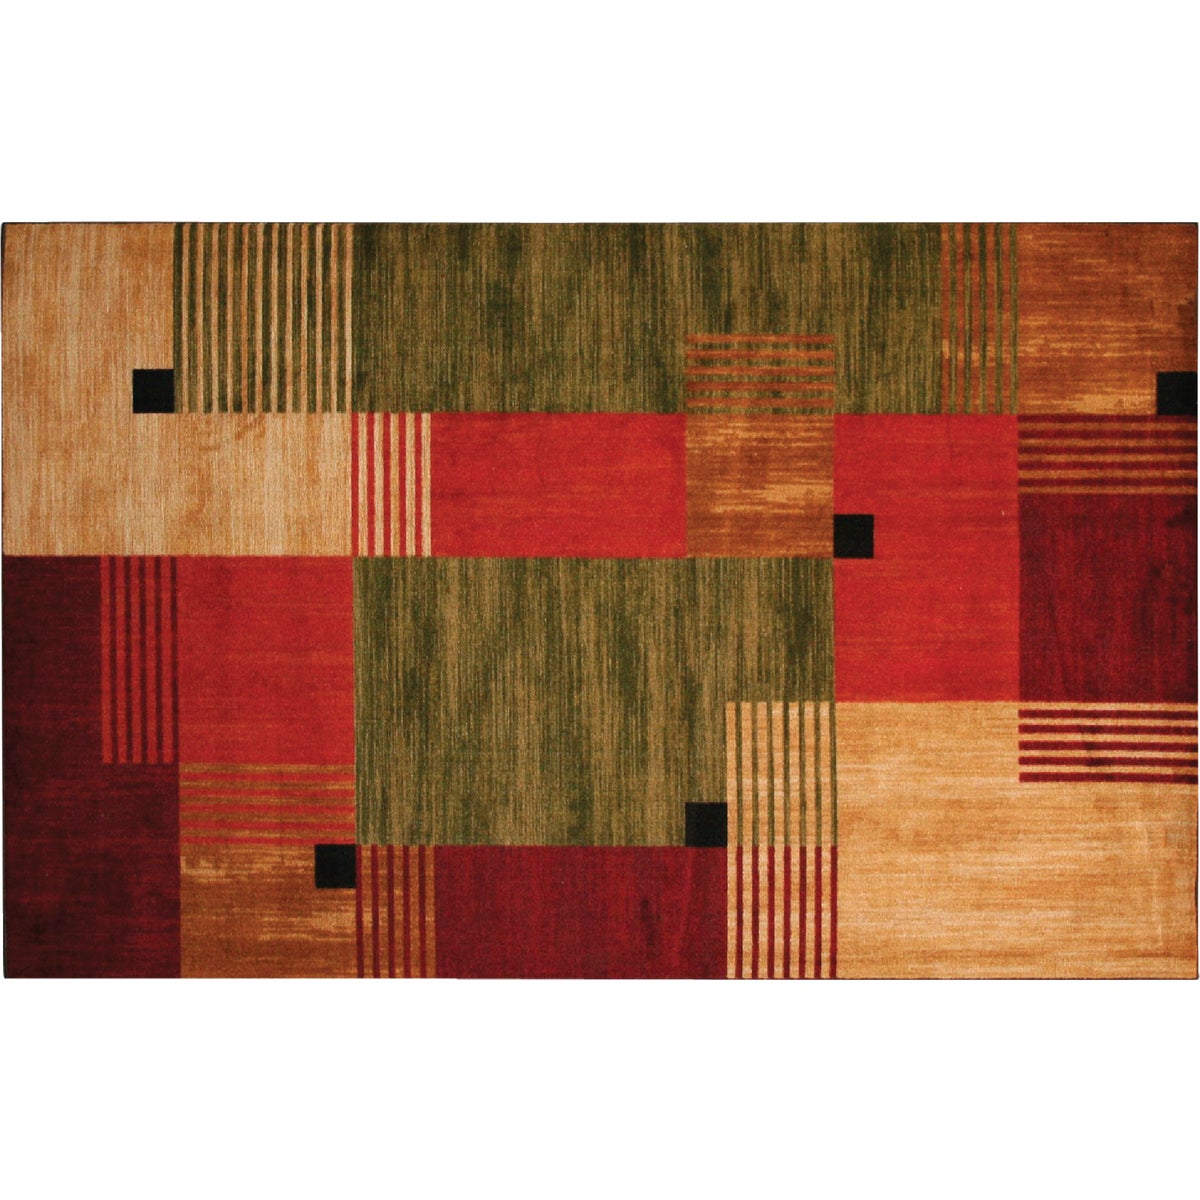 Mohawk Home Alliance Multi-Color 1 Ft. 8 In. x 2 Ft. 10 In. Accent Rug